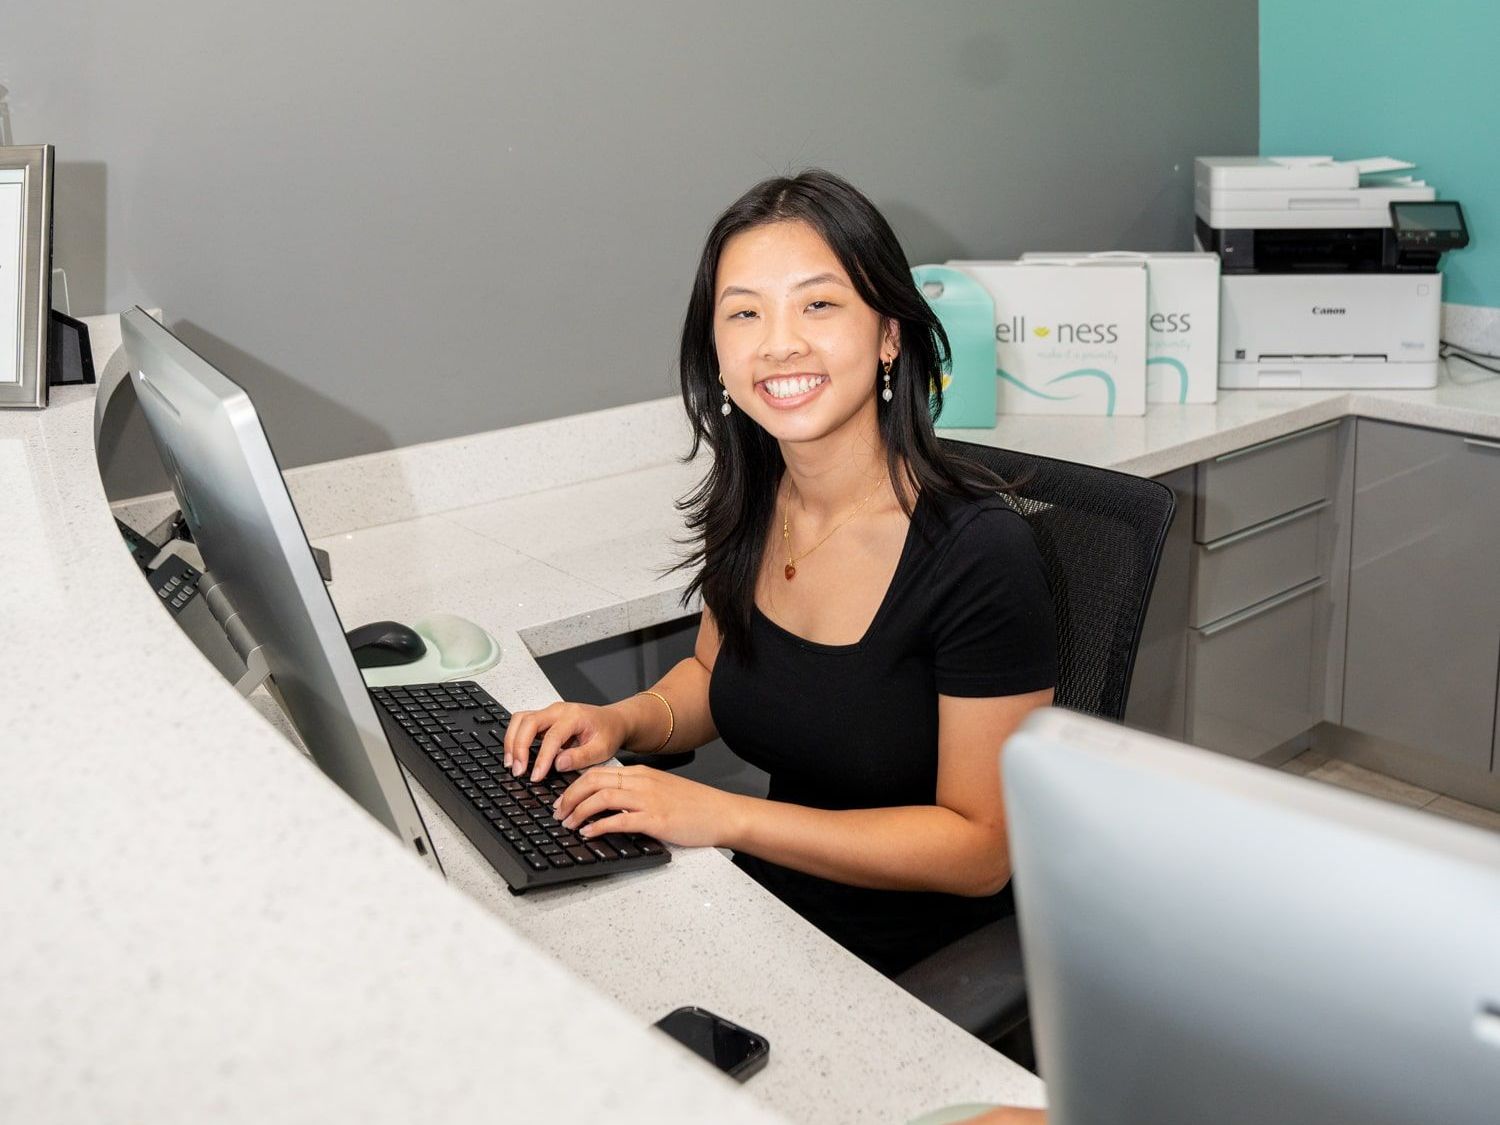 An image of a front desk employee smiling at the camera